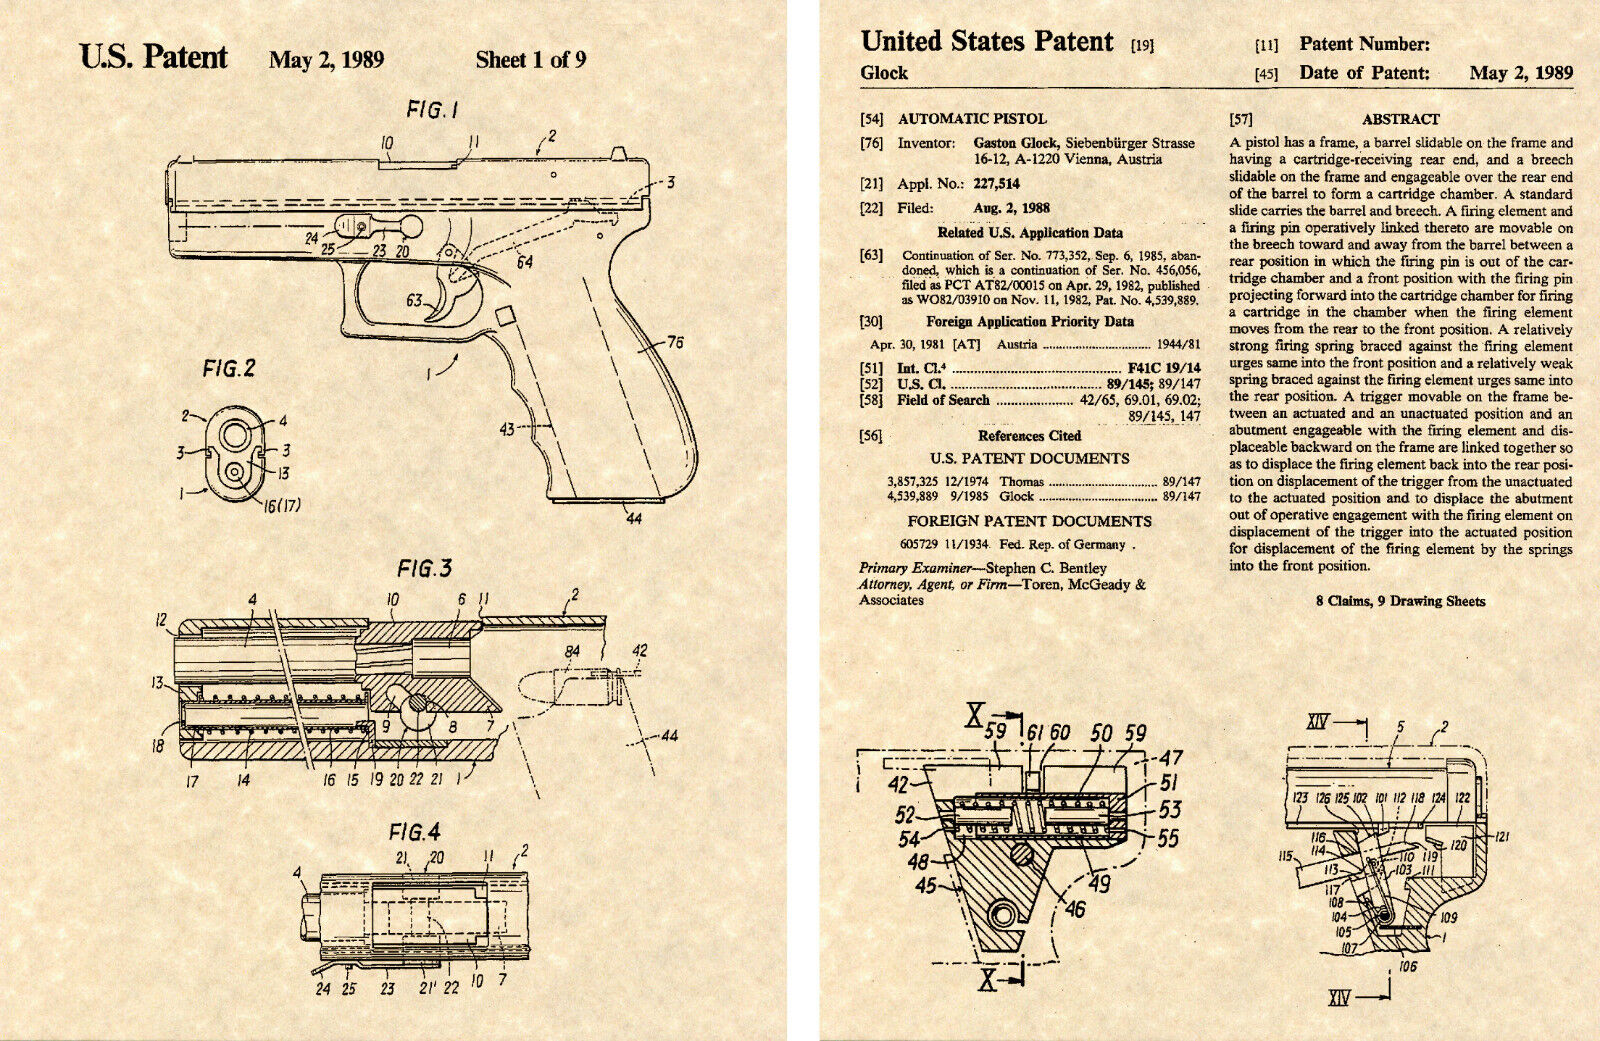 US PATENT for GLOCK AUTOMATIC PISTOL READY TO FRAME 17 21 22 40 45